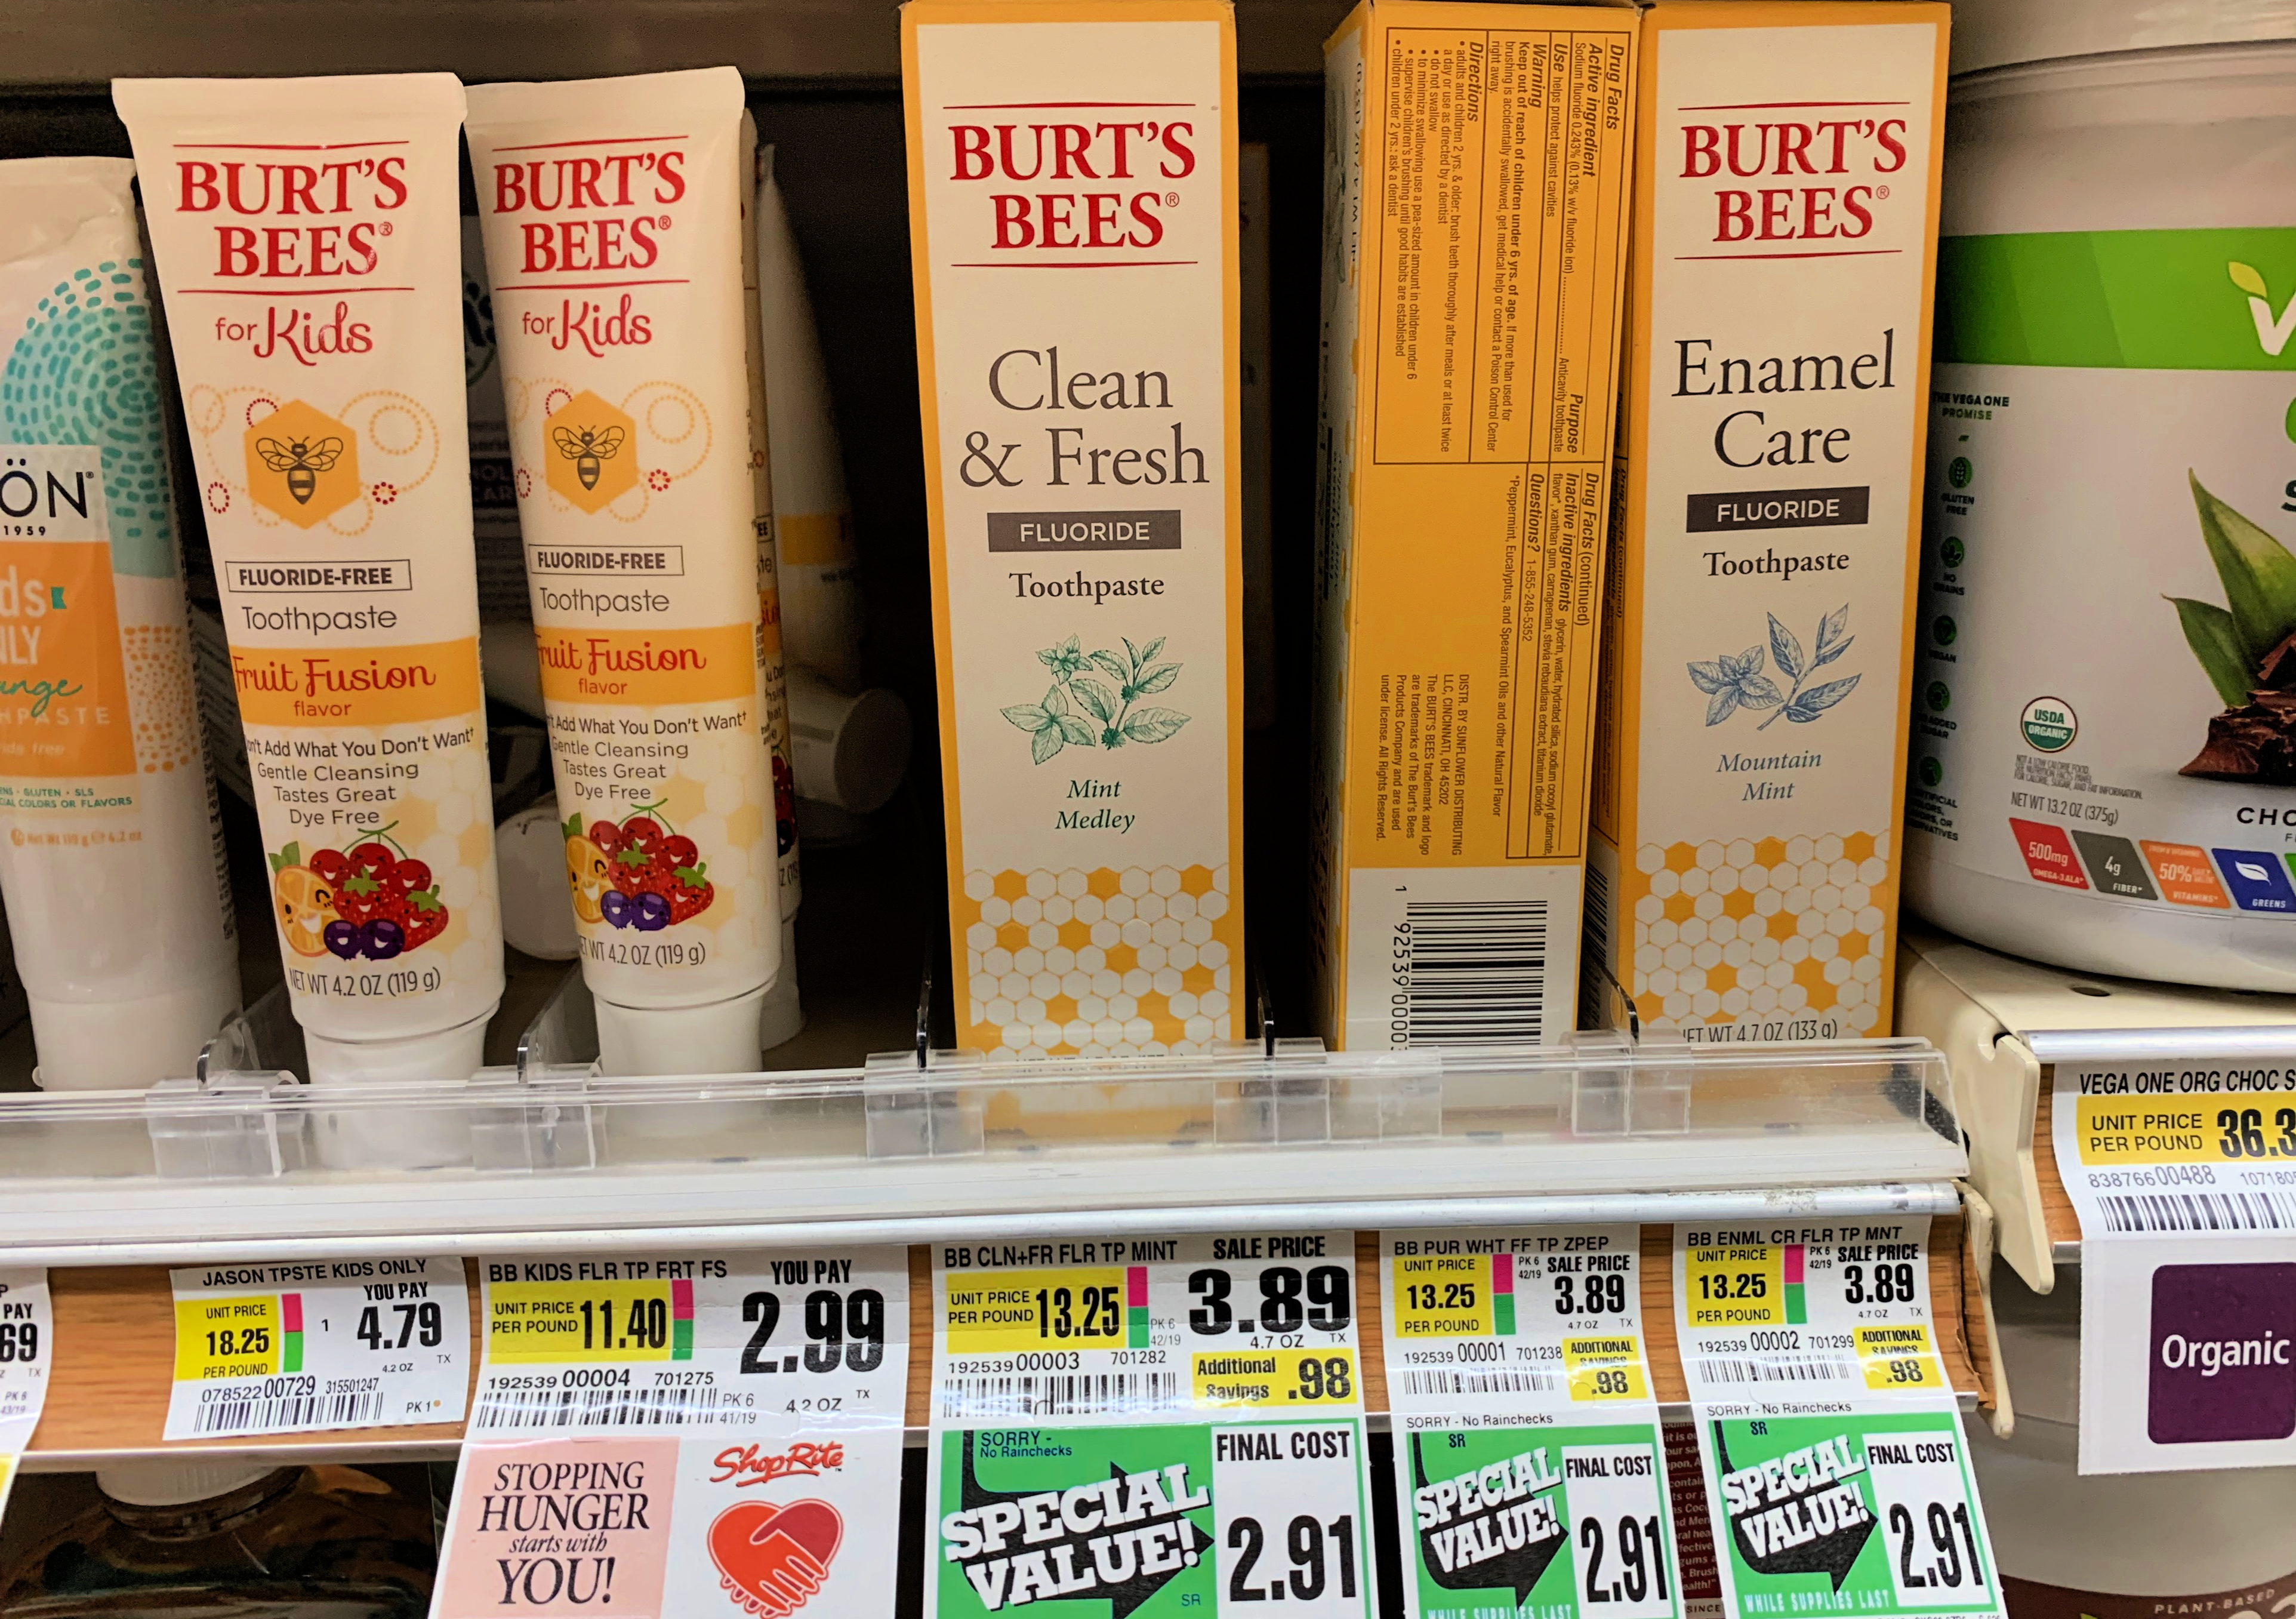 Burt’s Bees Adult Toothpaste Just $0.91 at ShopRite! {Clearance Deal